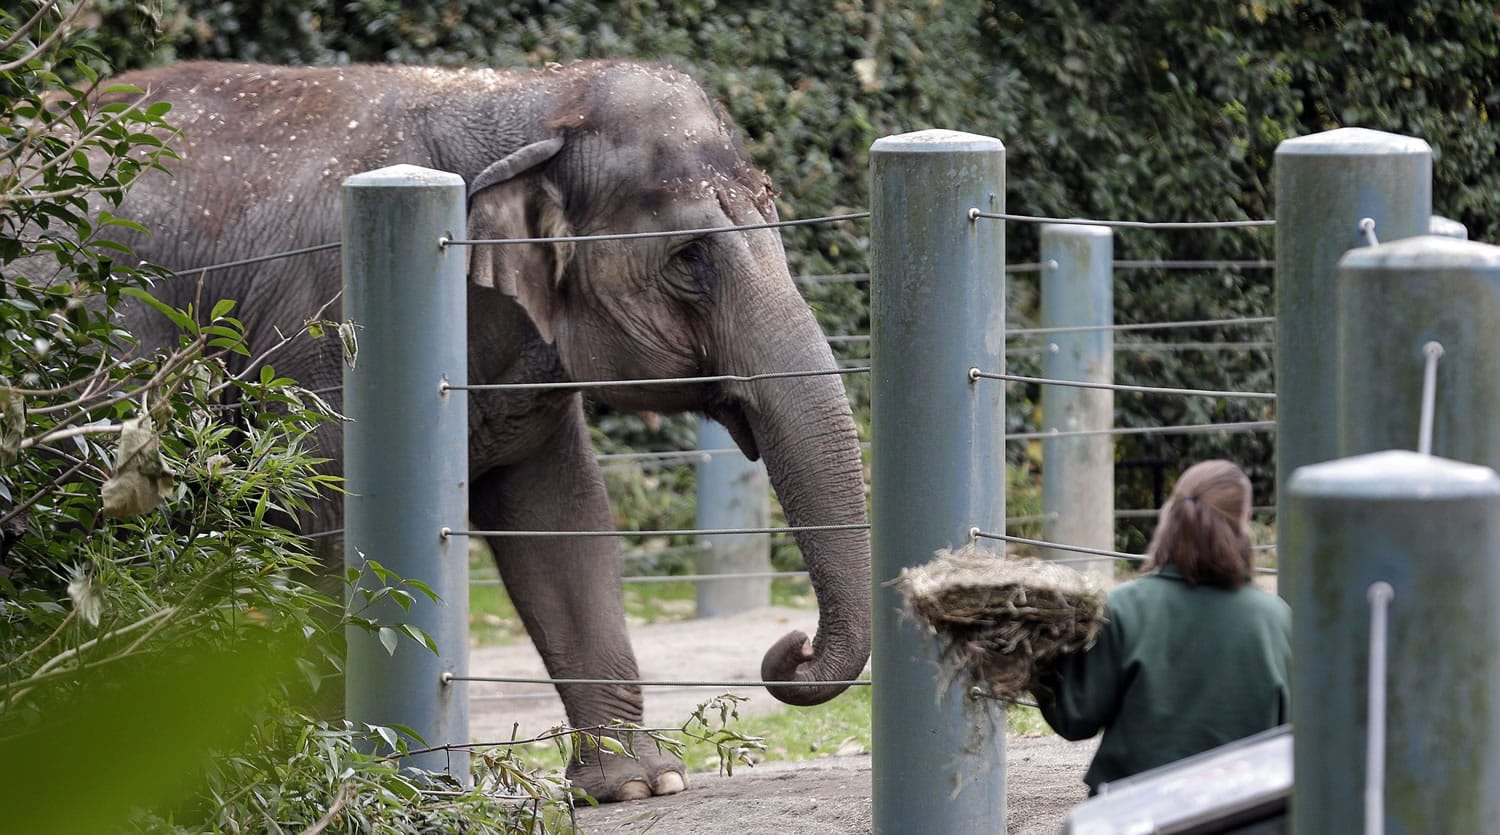 Bamboo, an Asian elephant, walks in her enclosure at the Woodland Park Zoo in Seattle in November.